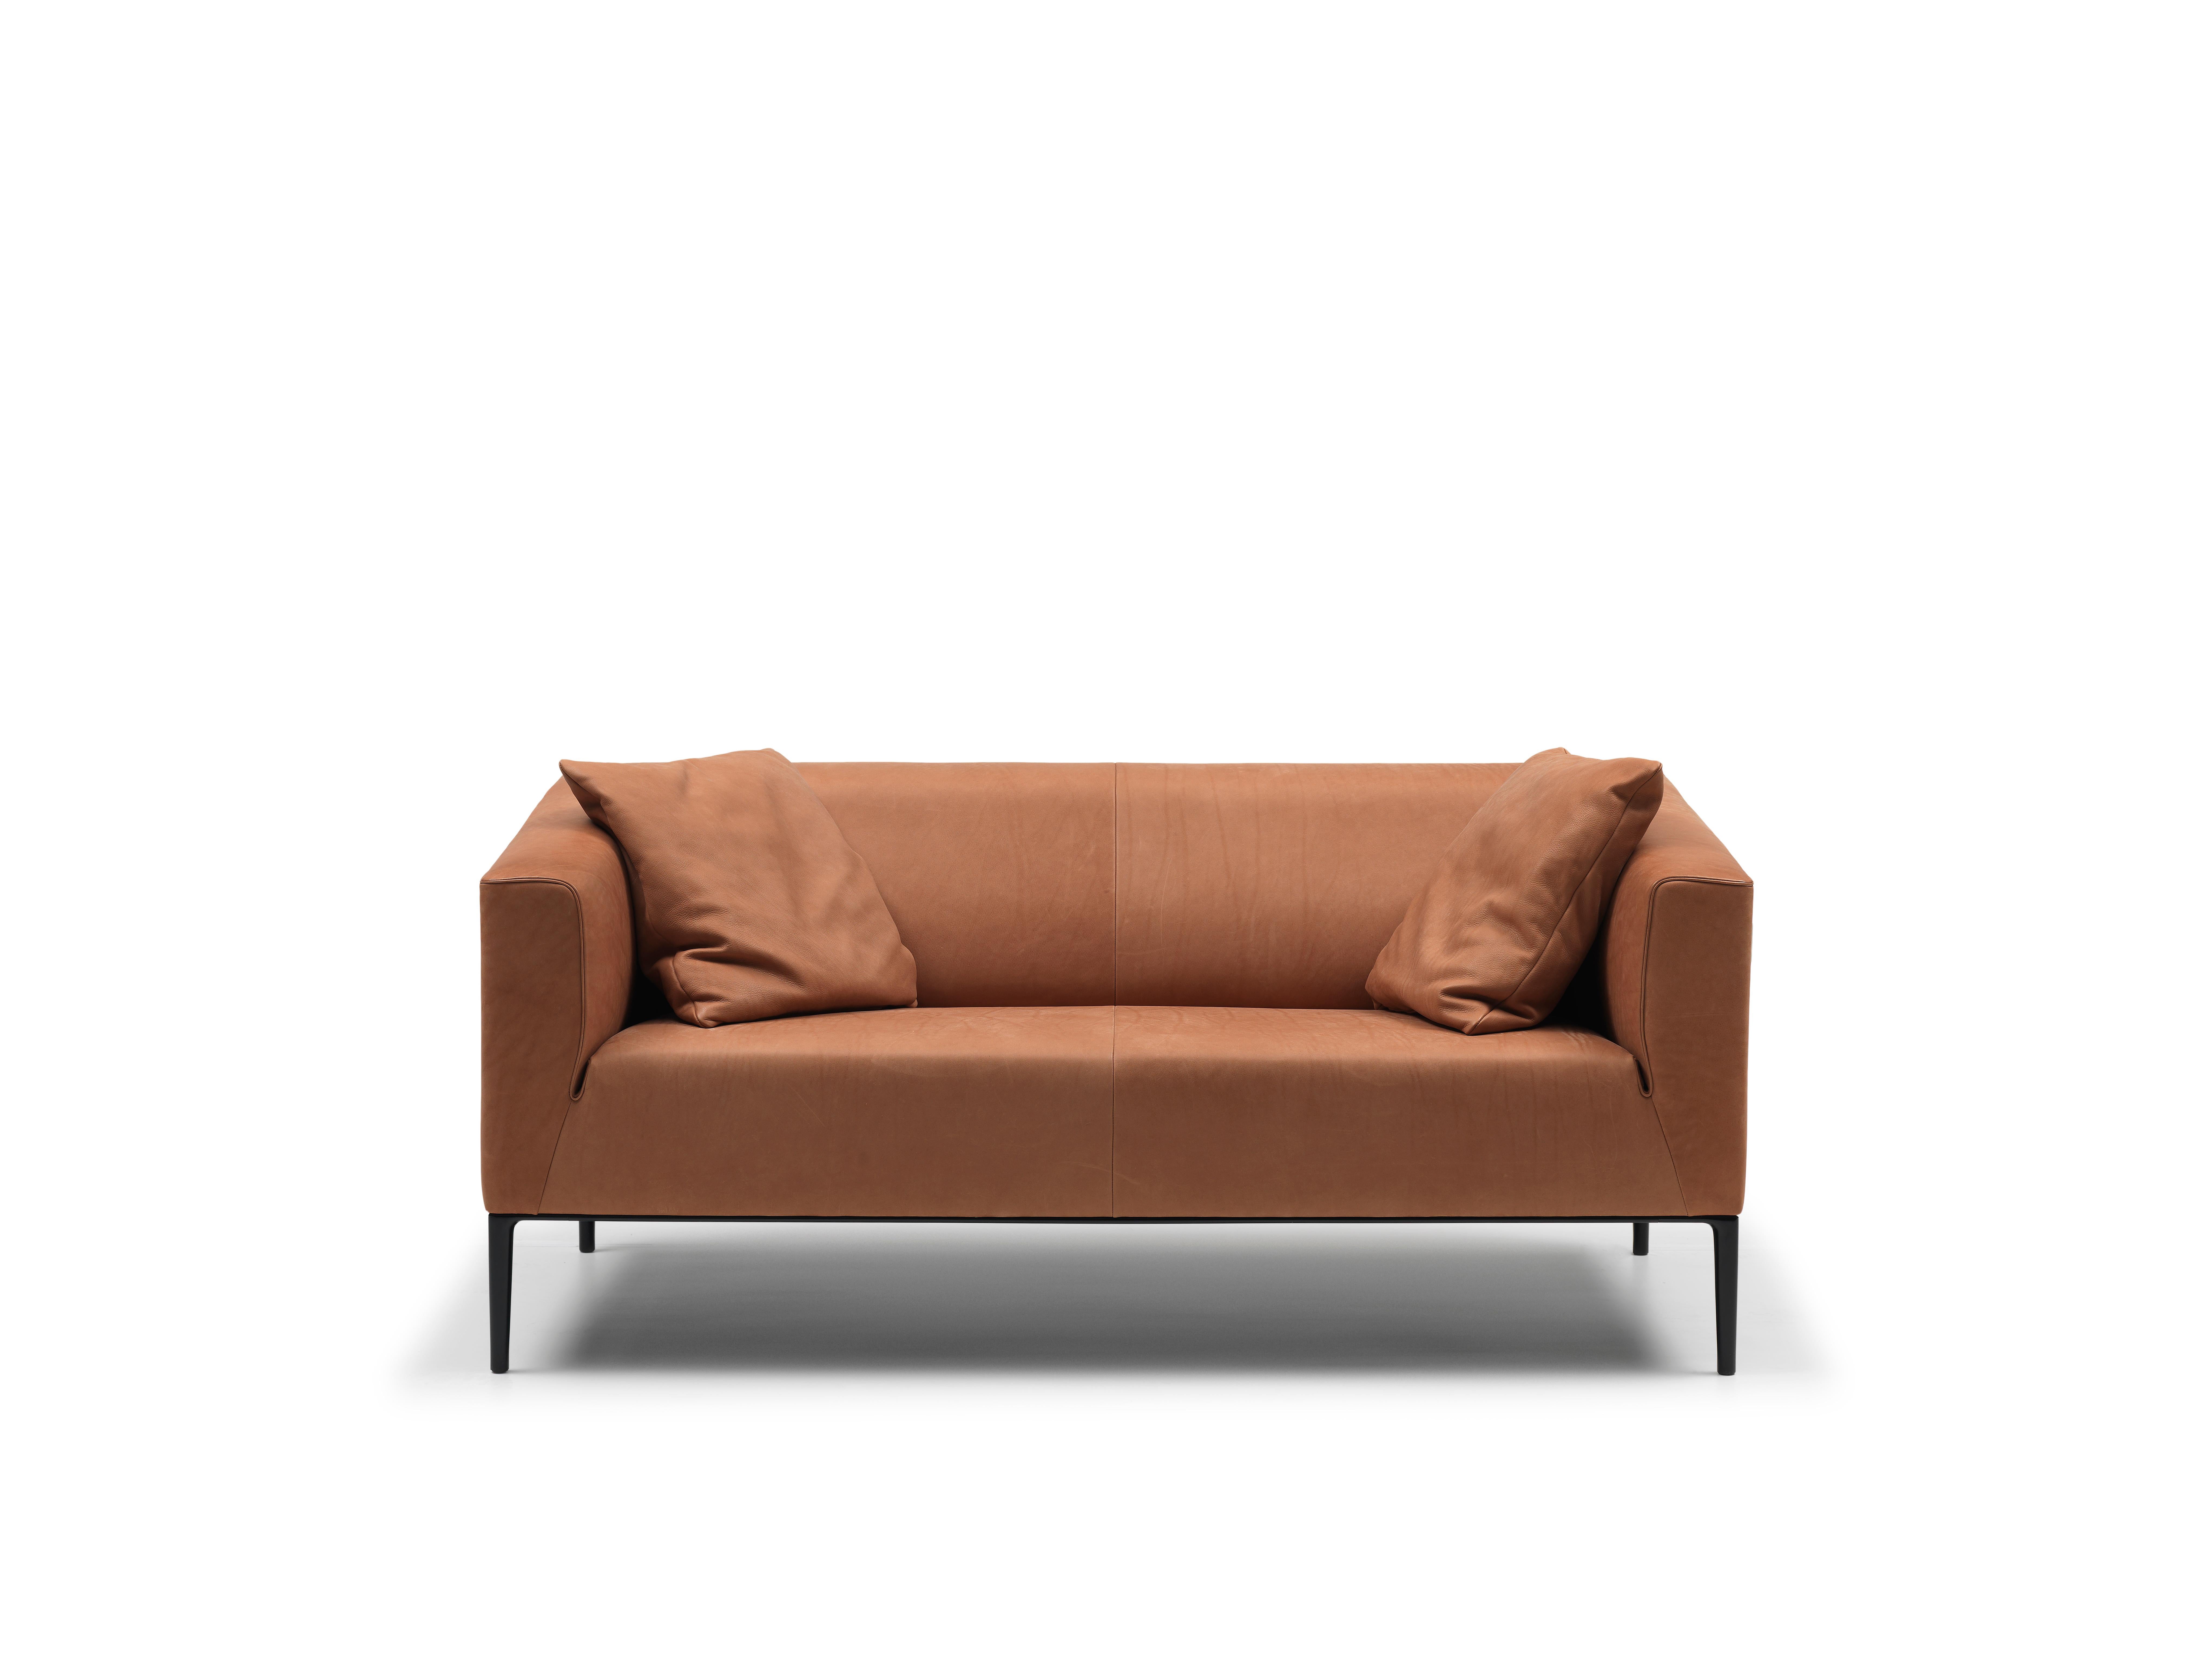 DS-161 sofa by De Sede
Dimensions: D 54 x W 157 x H 72 cm
Materials: aluminium, leather

Prices may change according to the chosen materials and size. 

A linear outer contour and round interior – the elegant piping of the contour focuses the